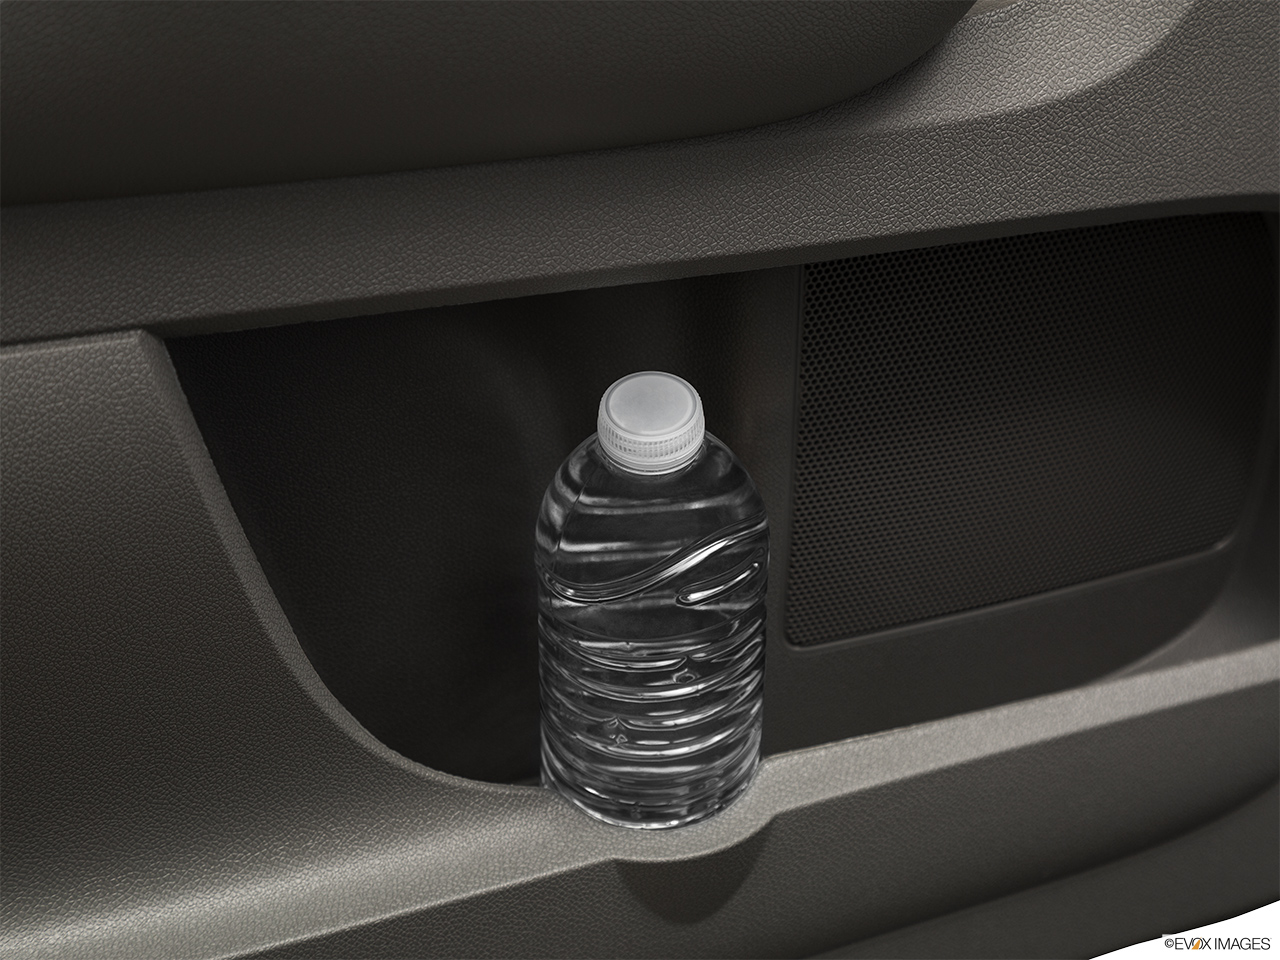 2017 GMC Acadia Limited SLT Second row side cup holder with coffee prop, or second row door cup holder with water bottle. 